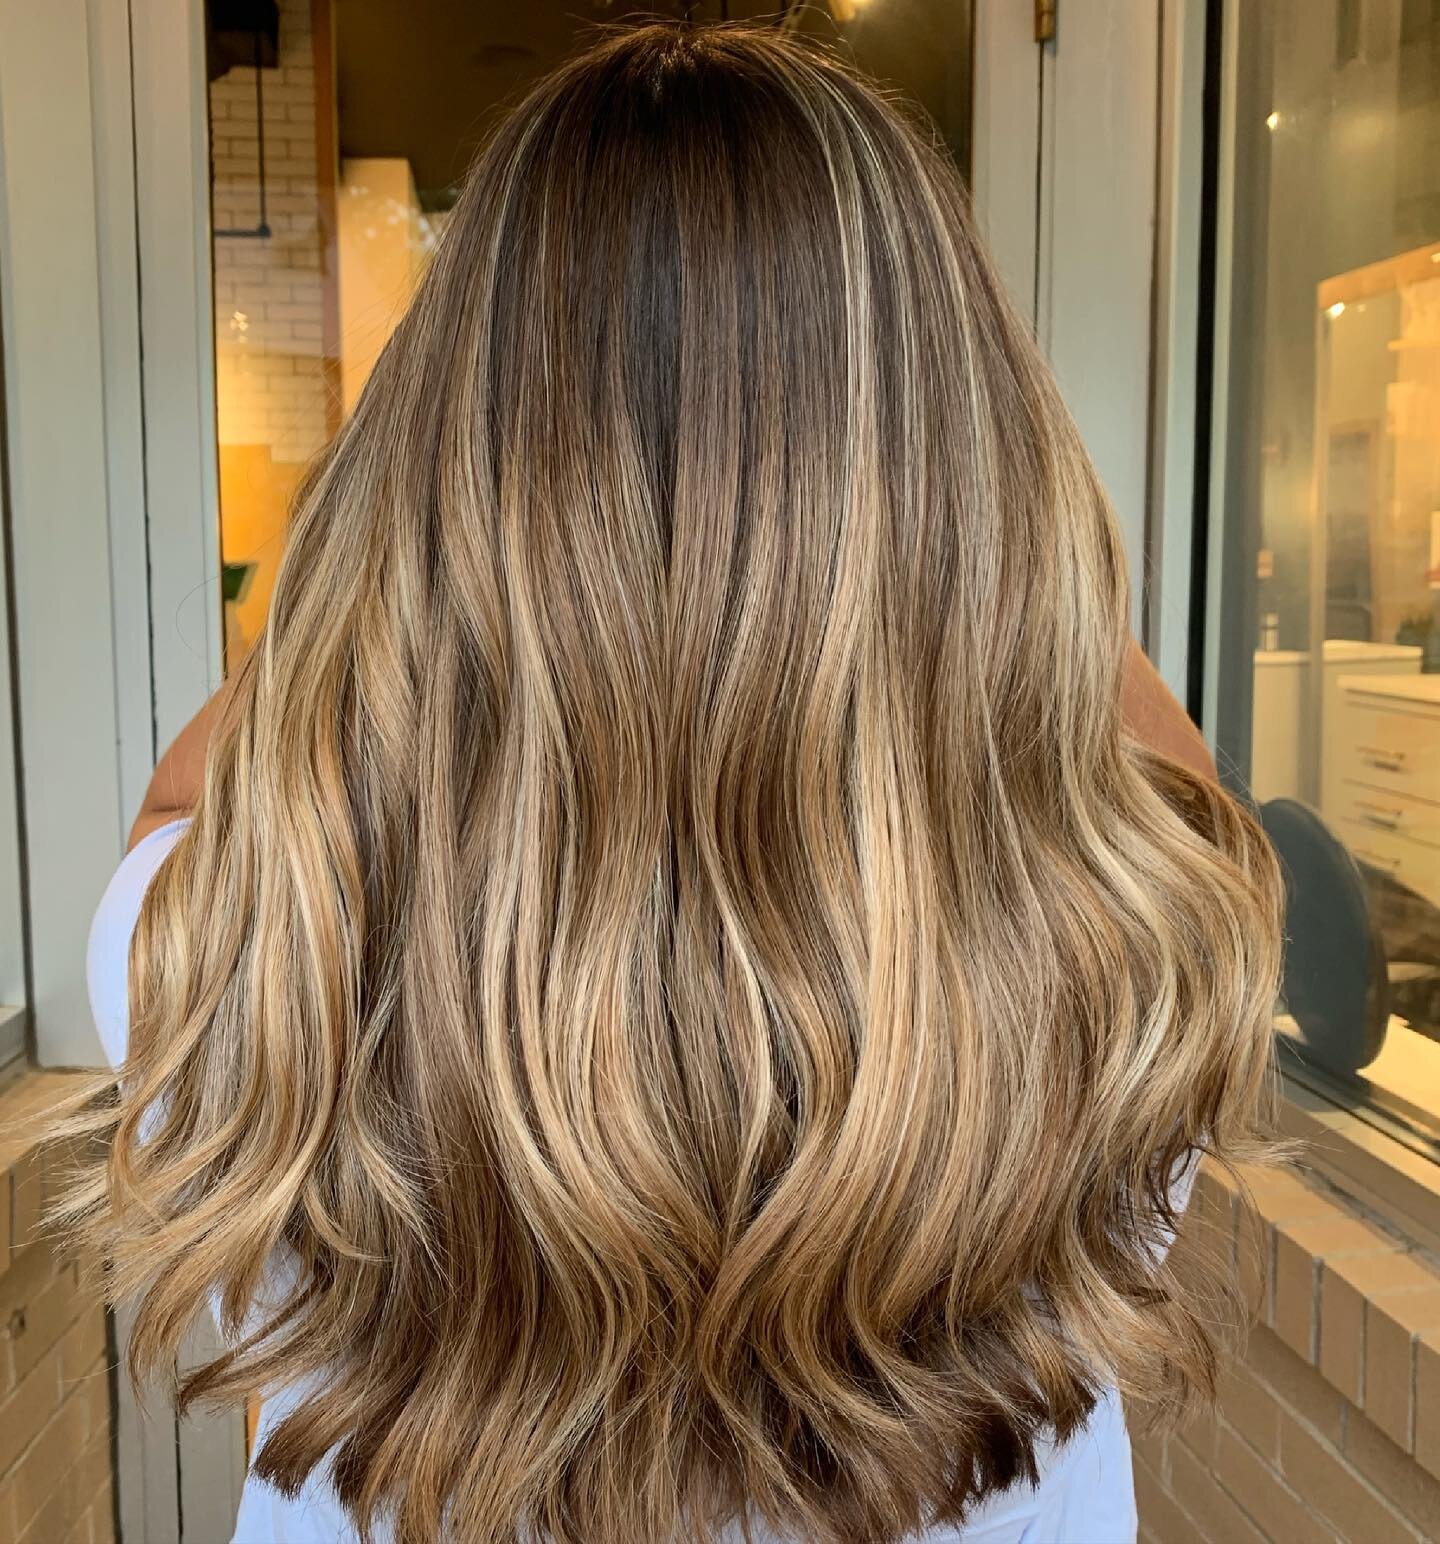 Hand painted hair always looks so whimsical. Blow out @allie_atphilosophe #balayage #balyagehair #bostonstylist #dedhamstylist #dedhamsalon @philosophehair